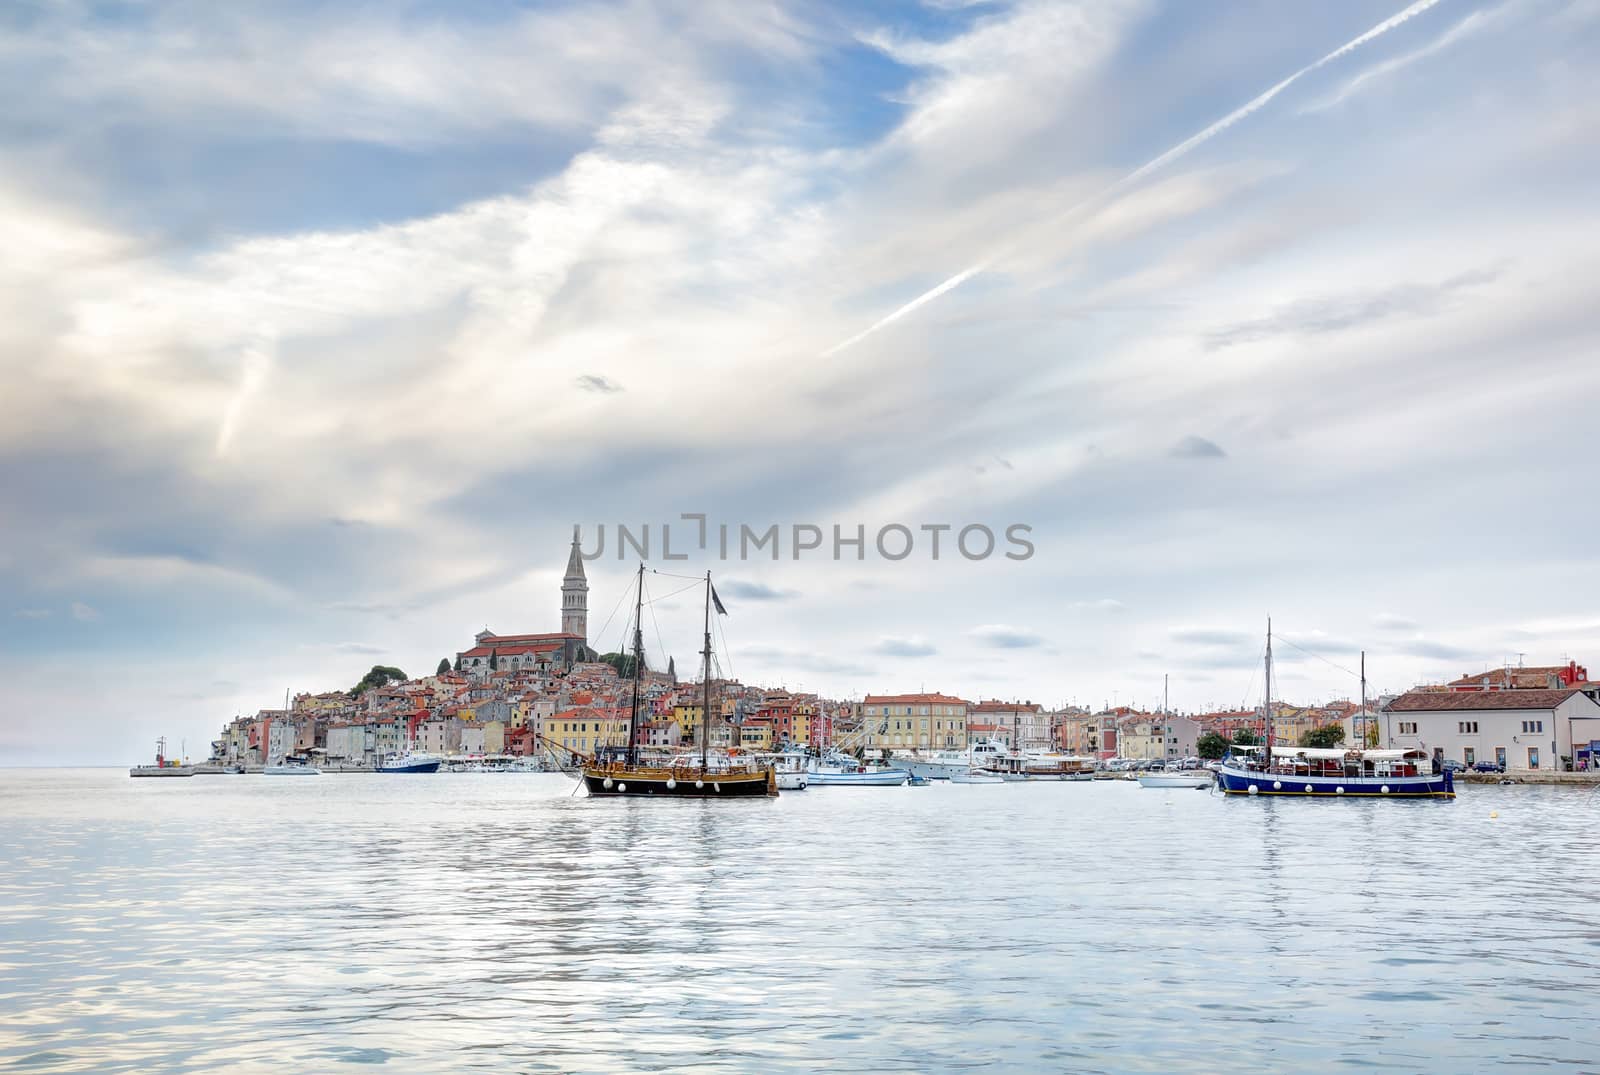 Late afternoon in the old Istrian town of Rovinj or Rovigno in the Adriatic Sea of Croatia with the Saint Euphemia's Basilica dominating the town.